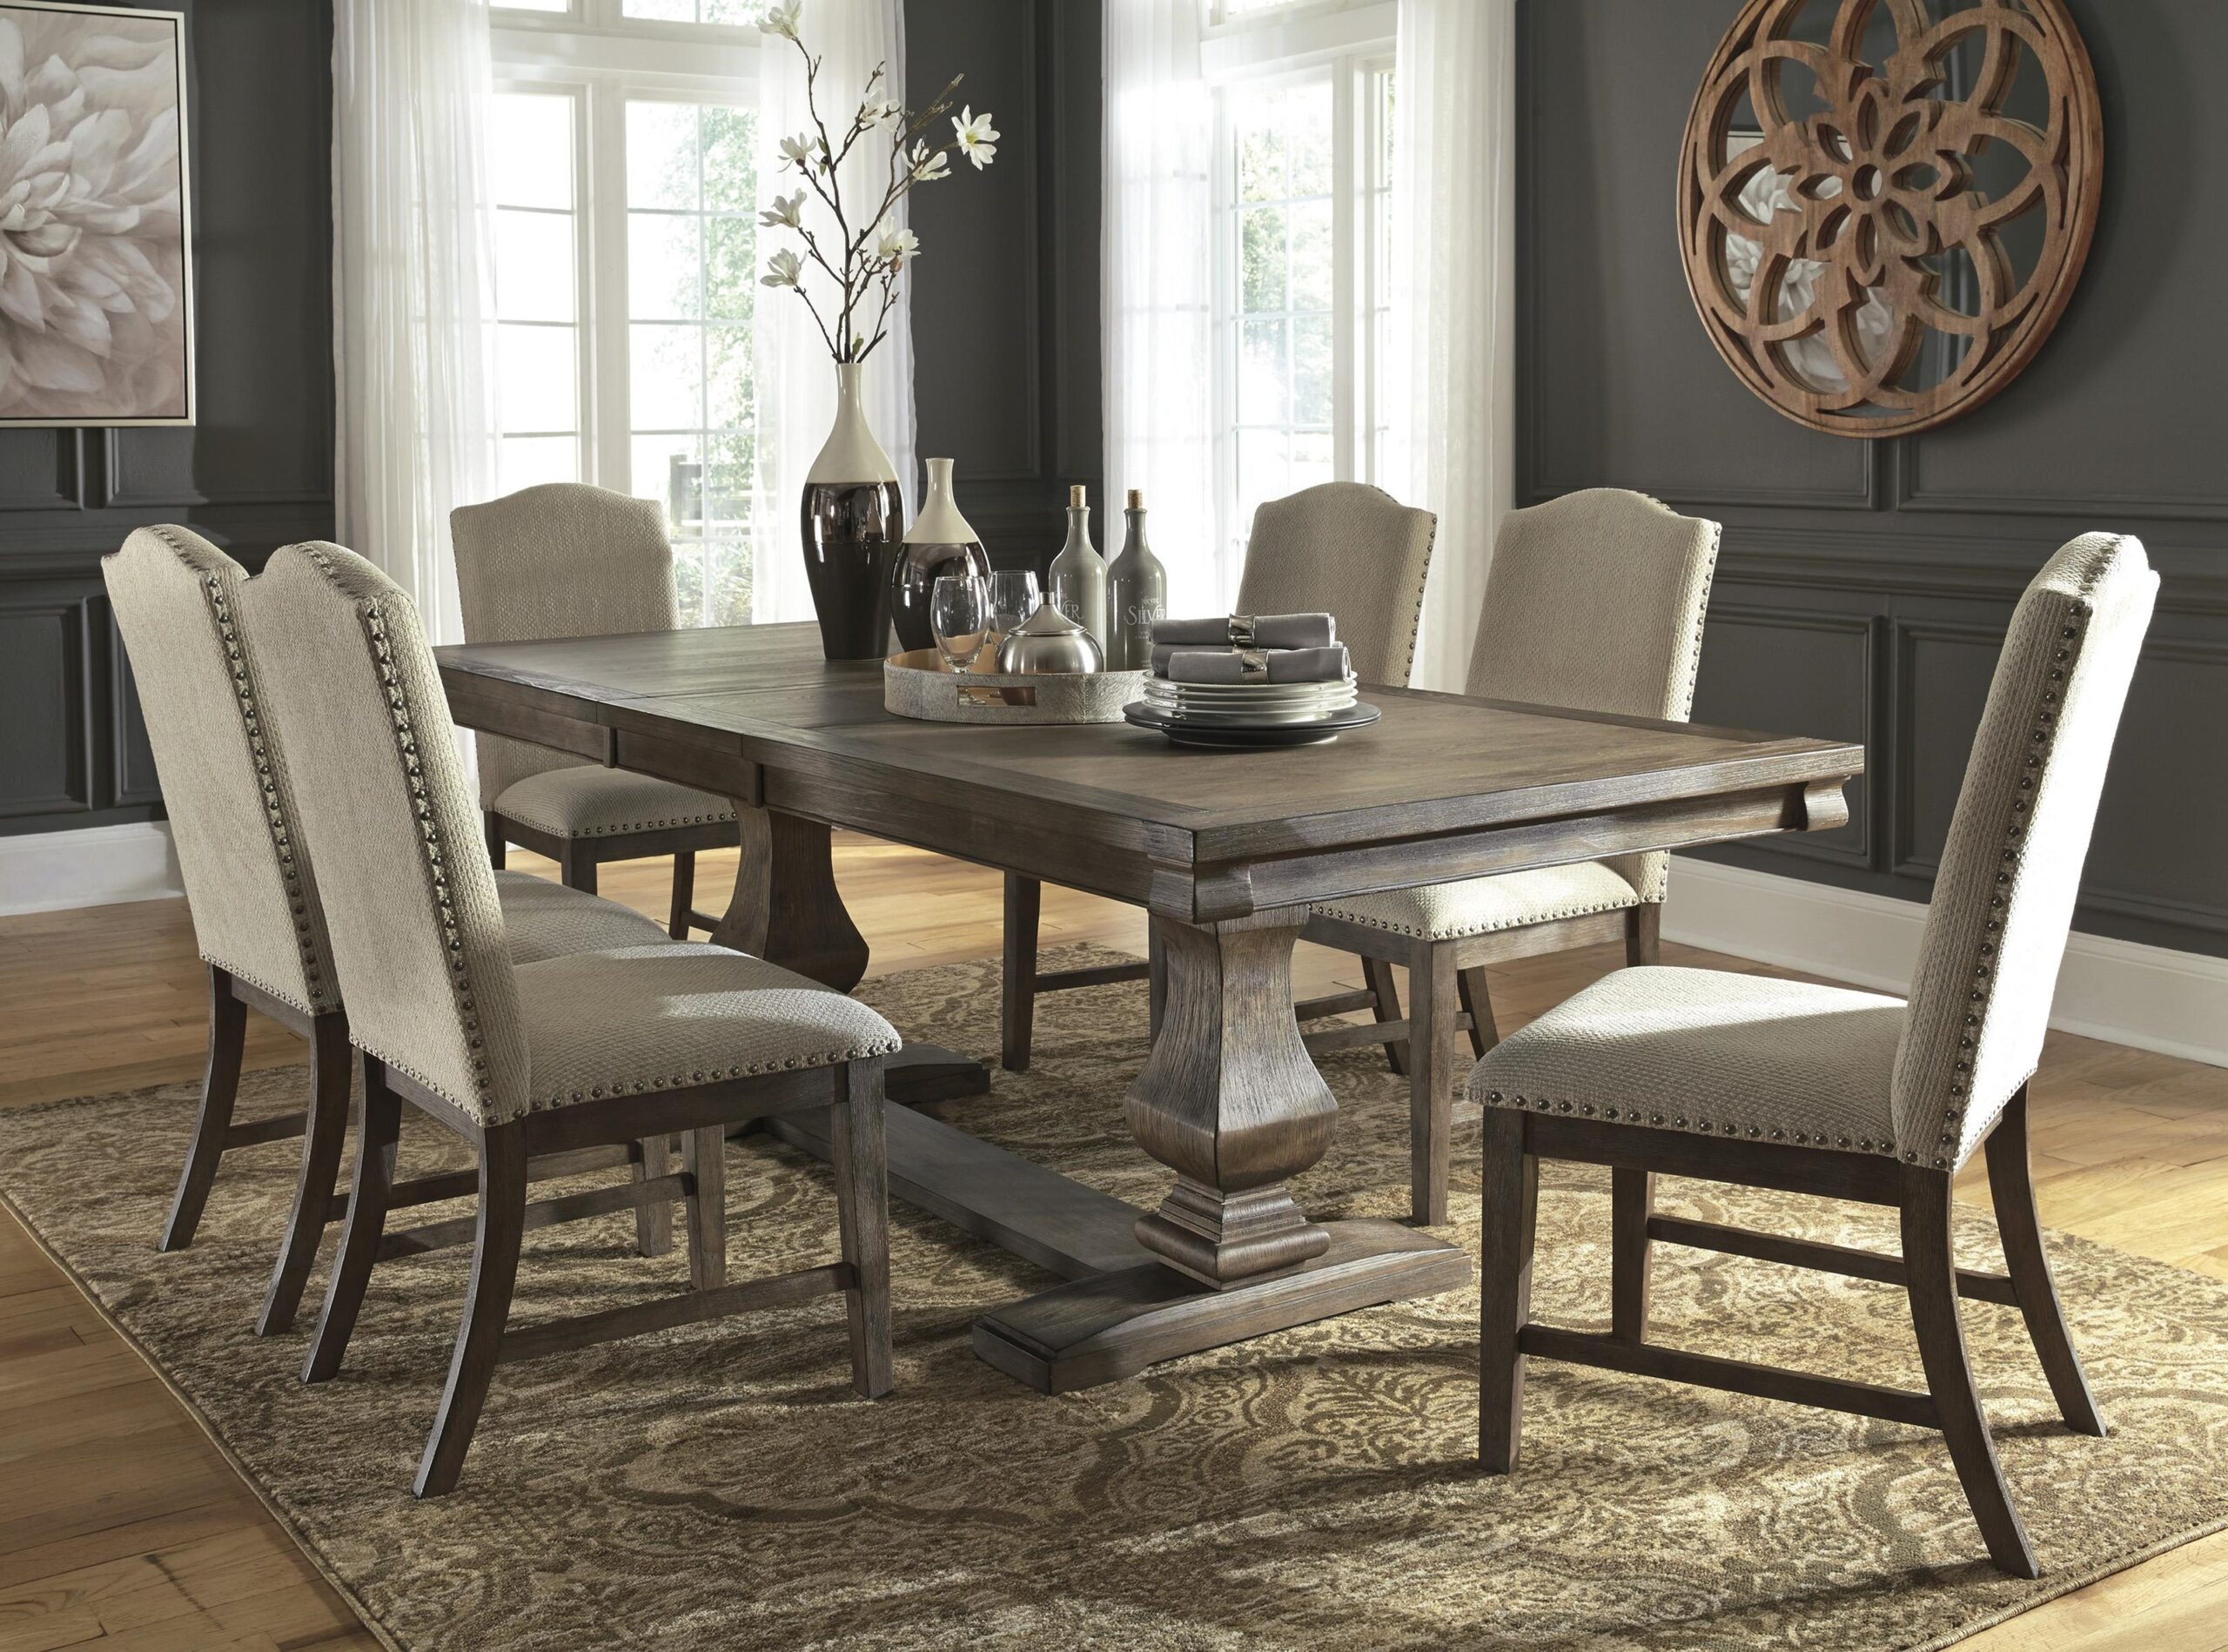 10 Stylish Dining Room Decoration Ideas for New Homeowners in 2022 ...